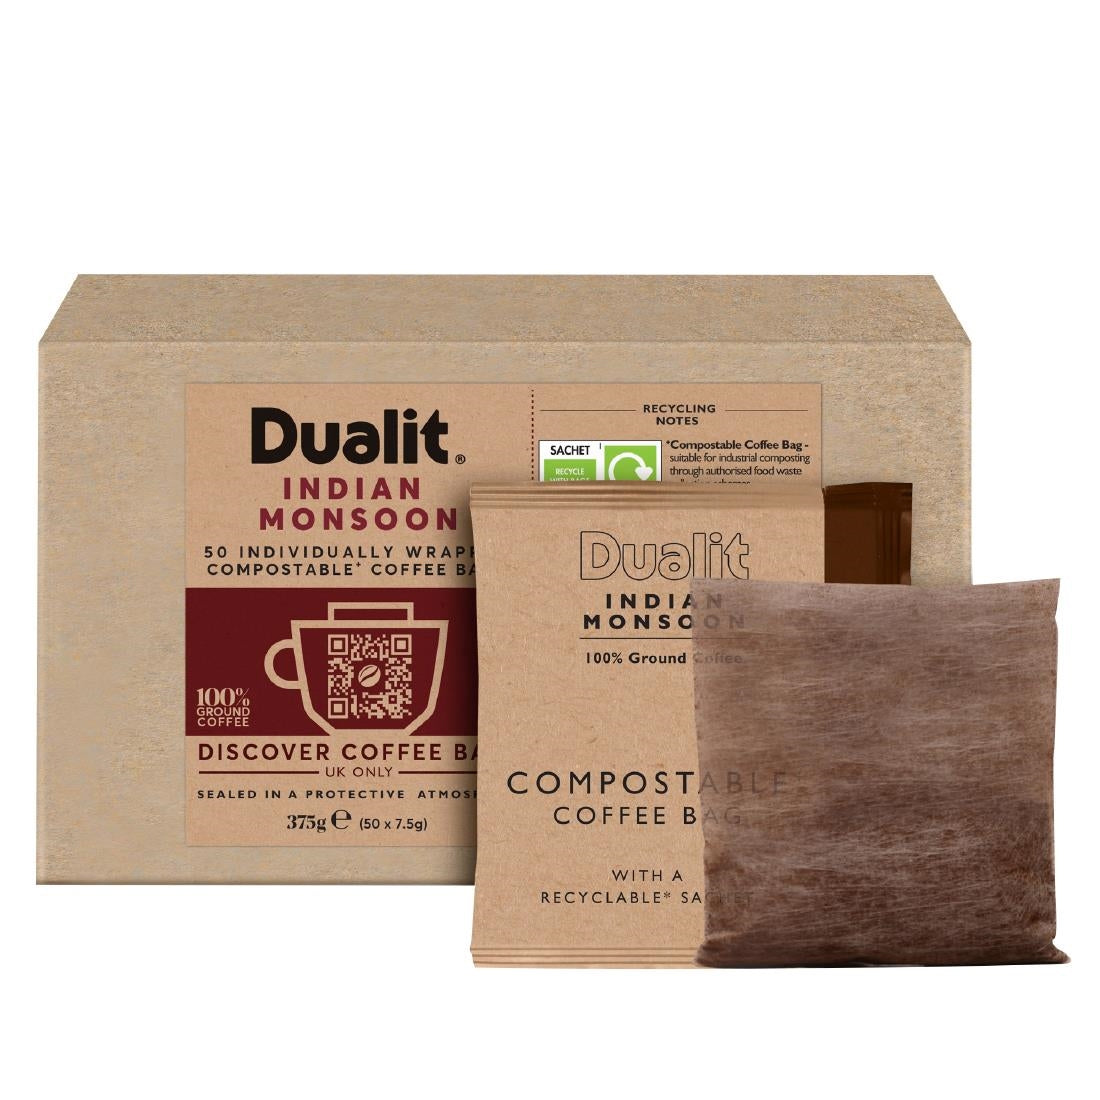 FX188 Dualit Indian Monsoon Compostable Coffee Bags (Pack of 40)